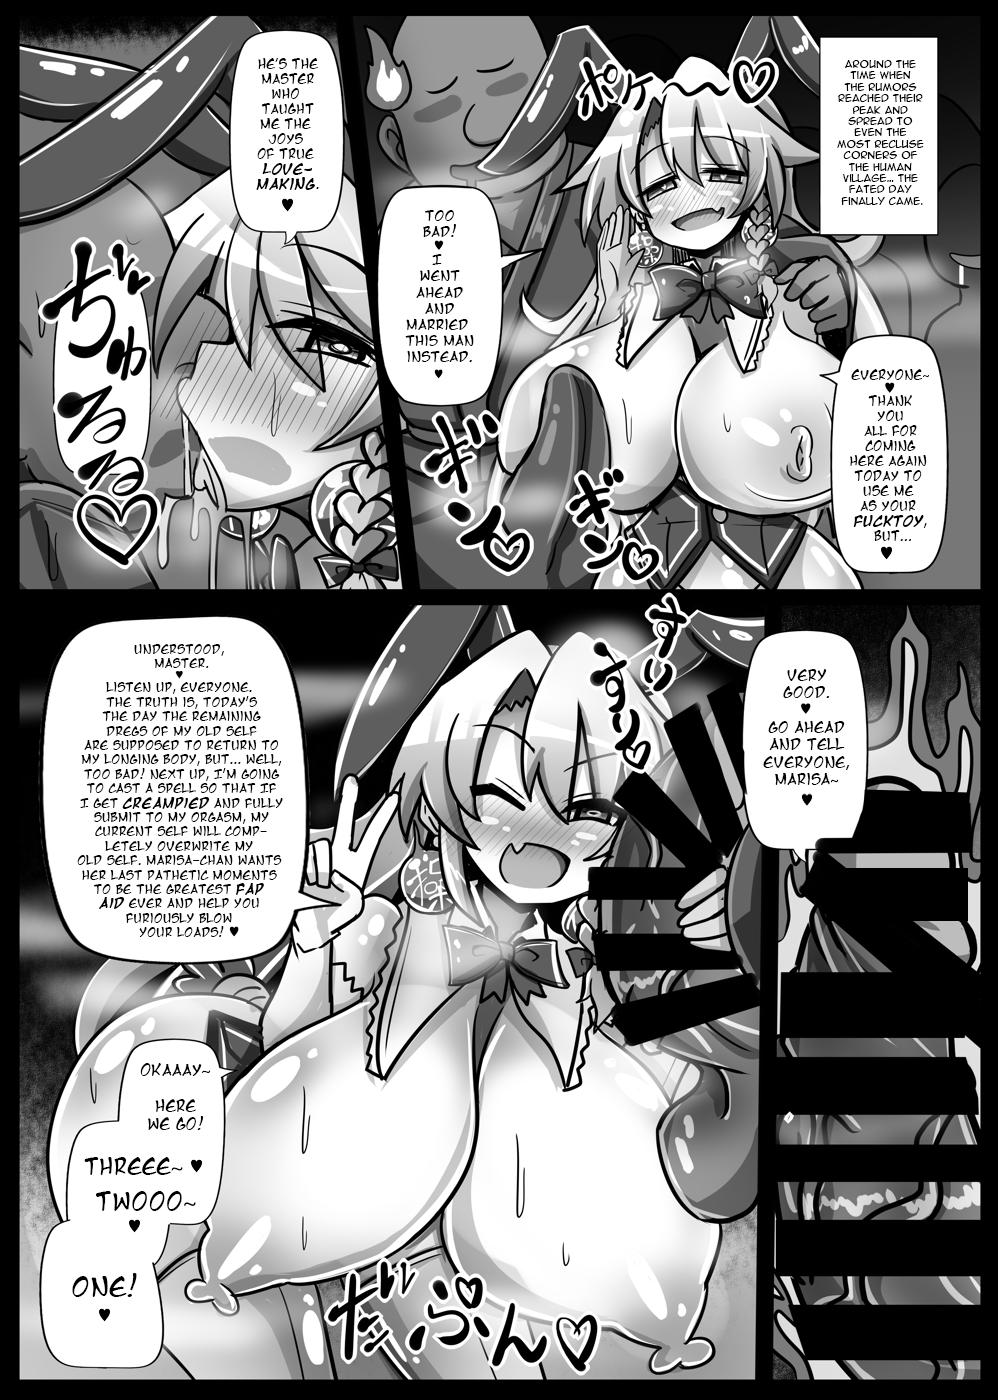 Fat Paradise of Fake Lovers The Brainwashing of Young Maidens Story 2 - Touhou project Celeb - Page 9